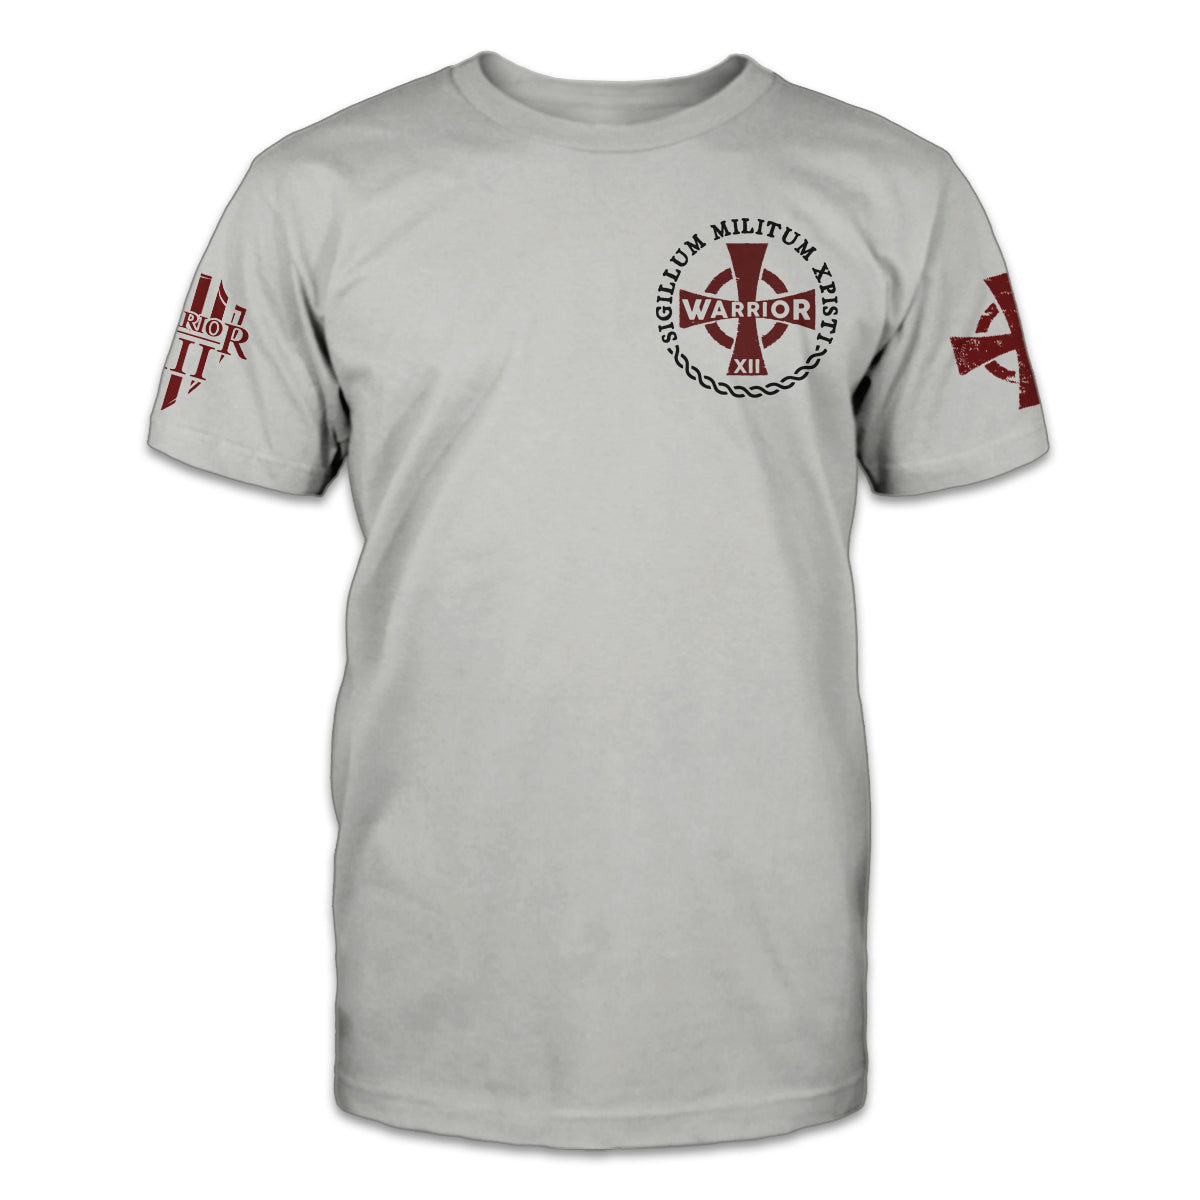 A white t-shirt with the cross emblem printed on the front.